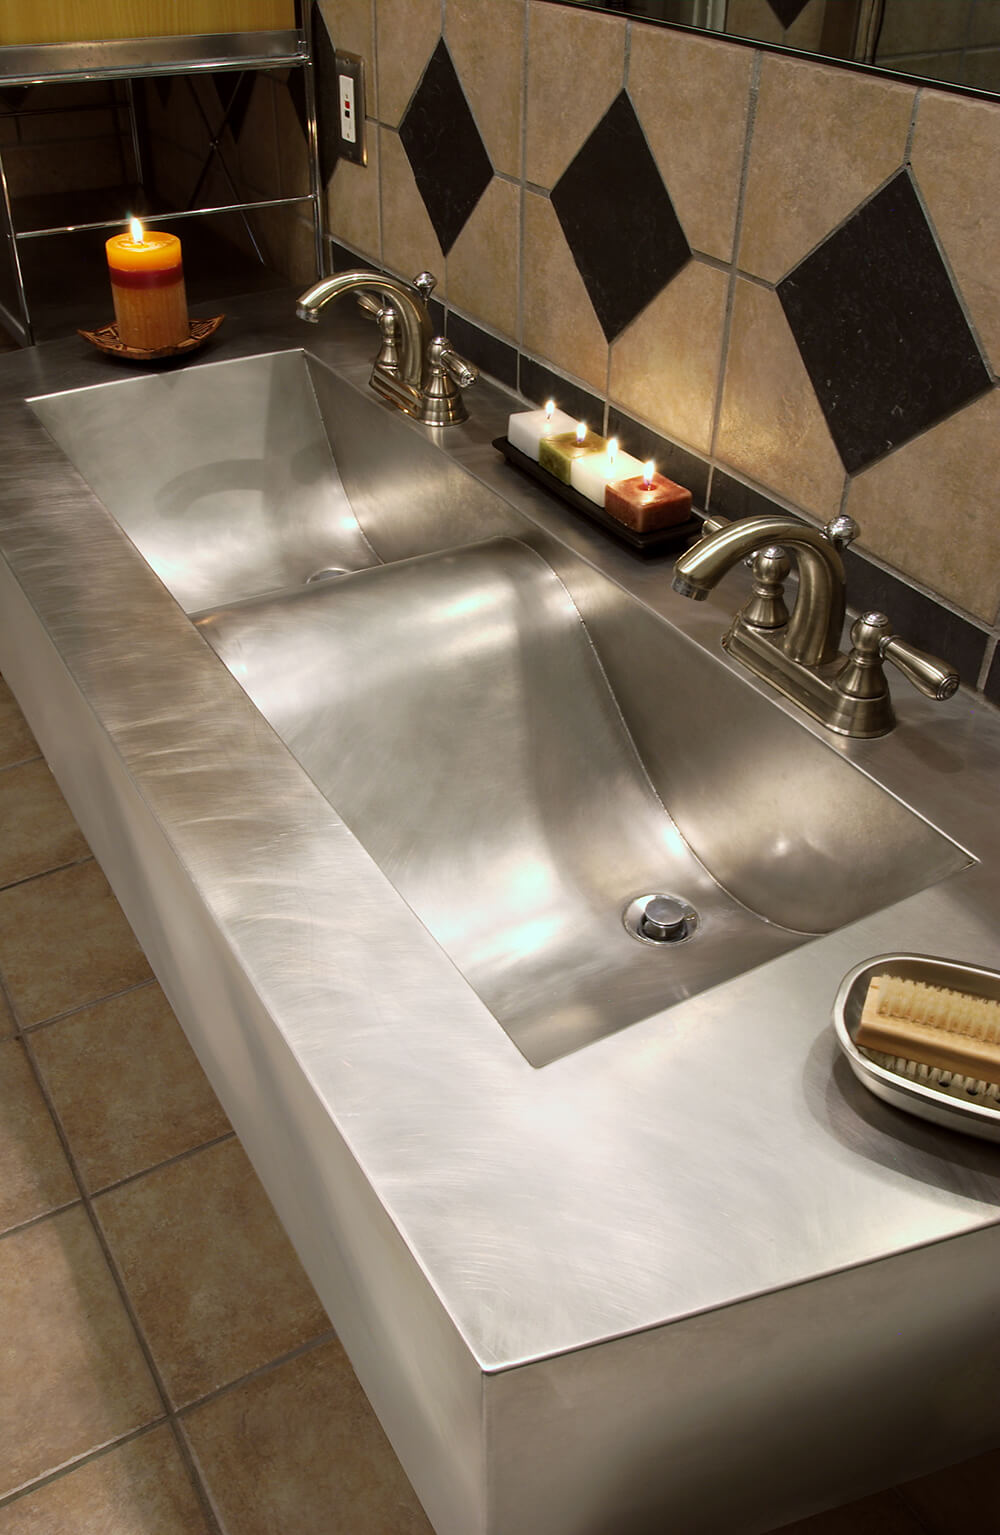 24”x72”x10” stainless steel mid contoured wall mounted vessel sink